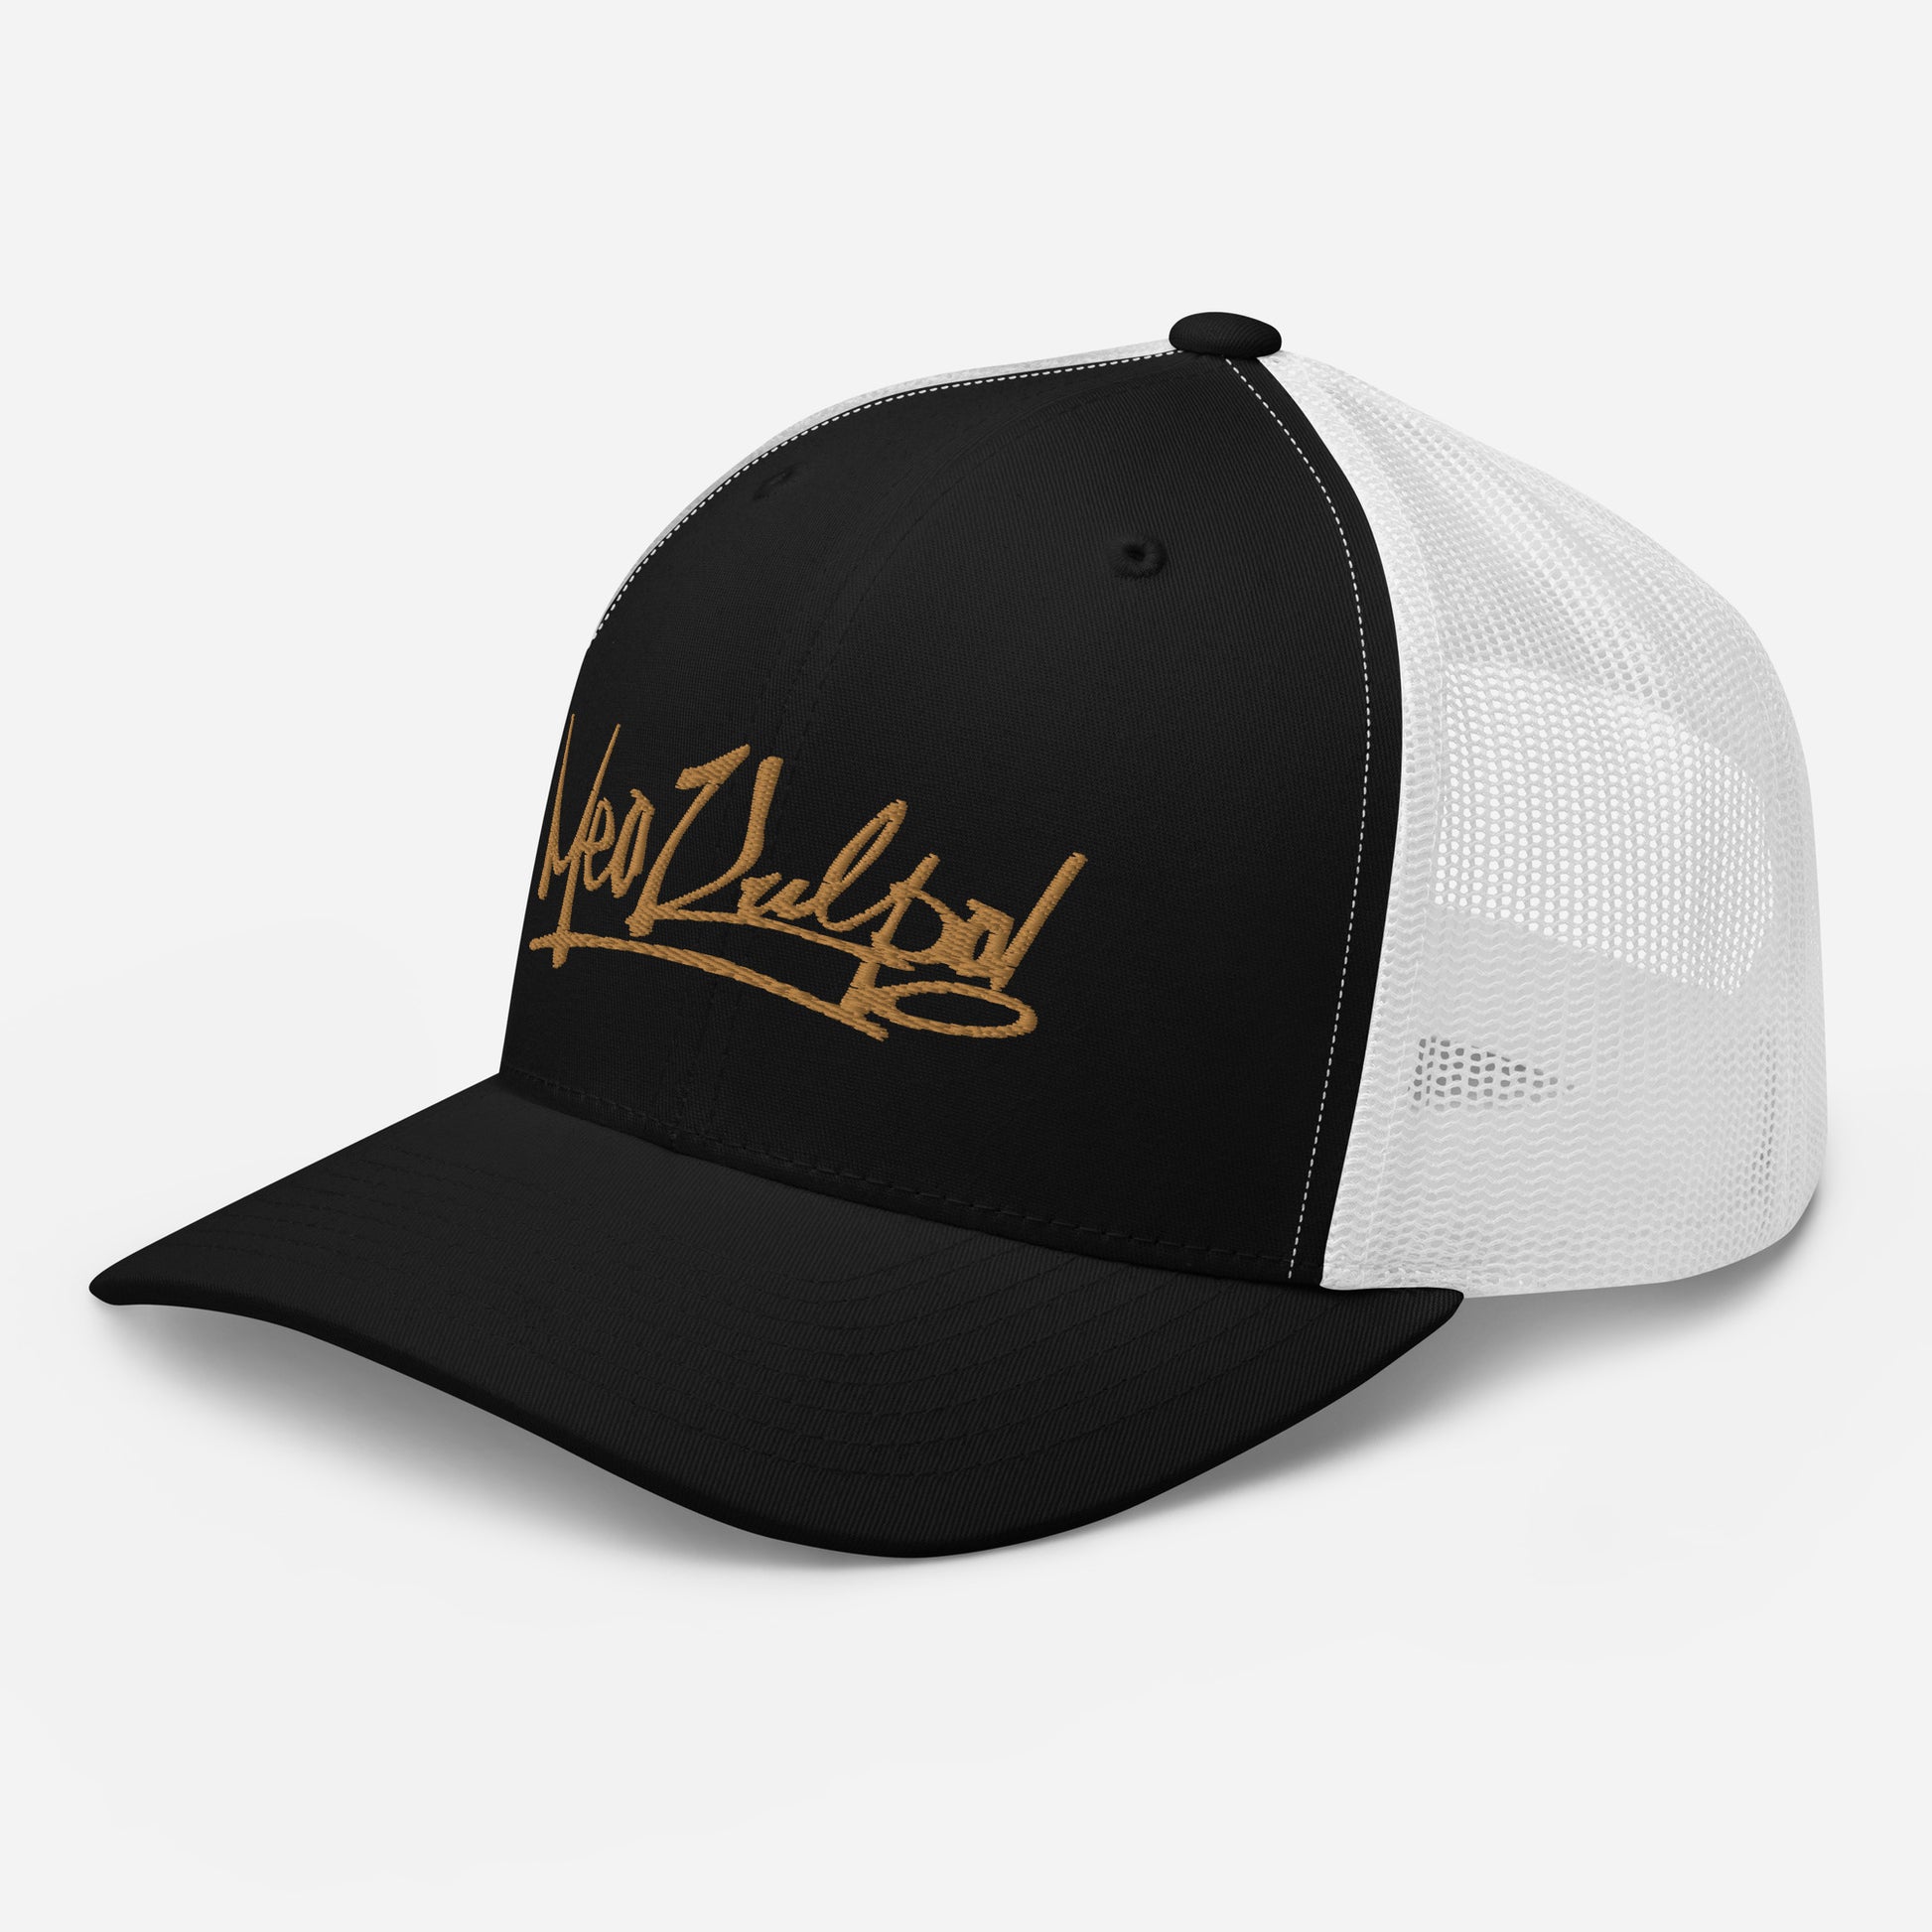 Side Angle - MeaKulpa Trucker Cap in Black and White Explore the sleek profile of the MeaKulpa Trucker Cap. The gold emblem glistens against the black front, while the white mesh back adds a touch of contrast. It's the perfect blend of modern sophistication and vintage charm.